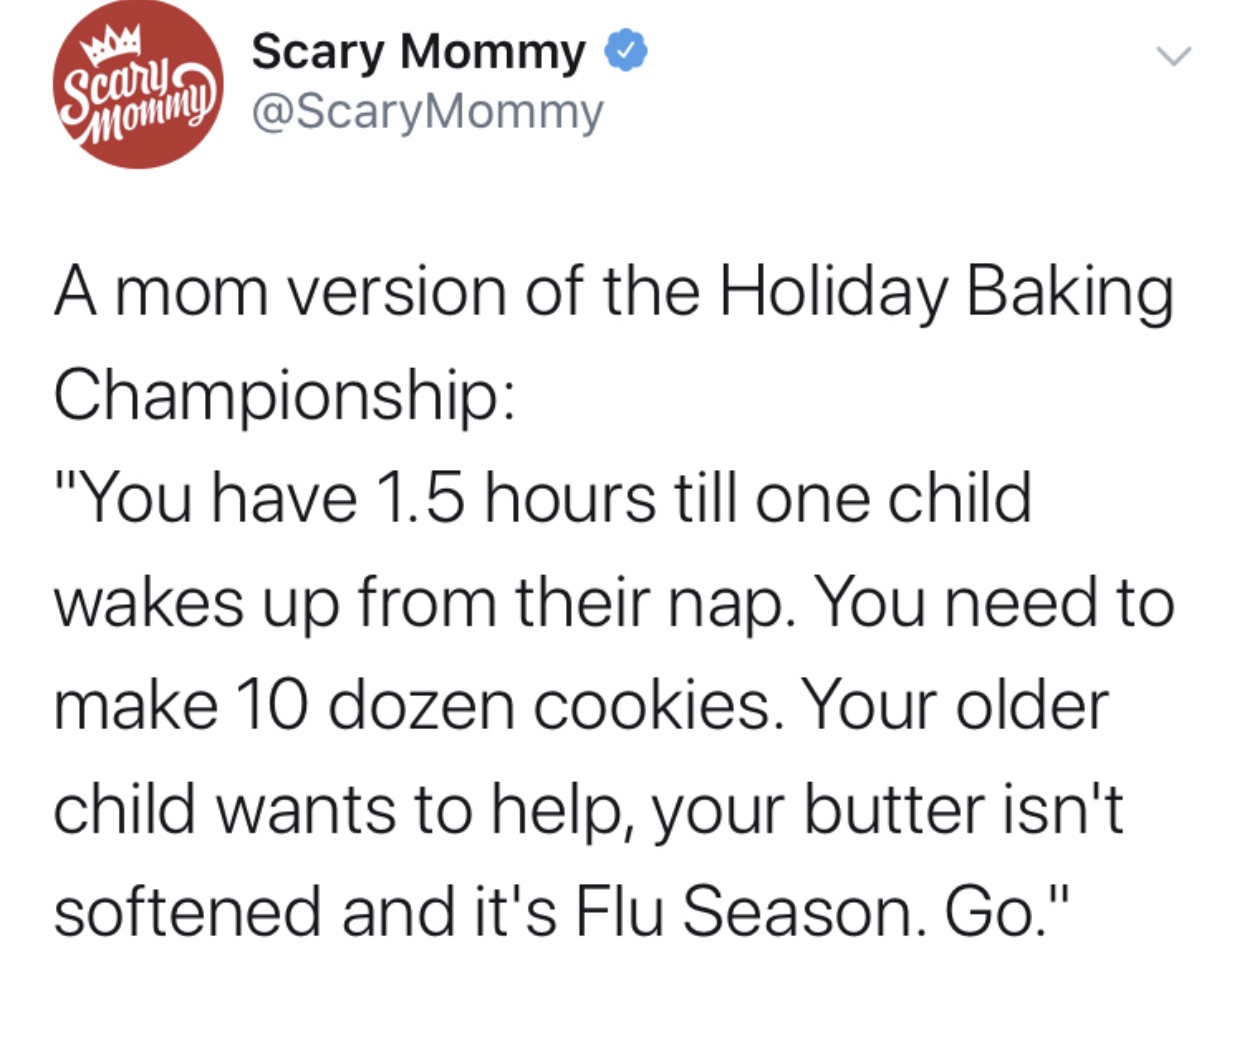 Gemini - Scaryo Scary Mommy Smommy A mom version of the Holiday Baking Championship "You have 1.5 hours till one child wakes up from their nap. You need to make 10 dozen cookies. Your older child wants to help, your butter isn't softened and it's Flu Seas